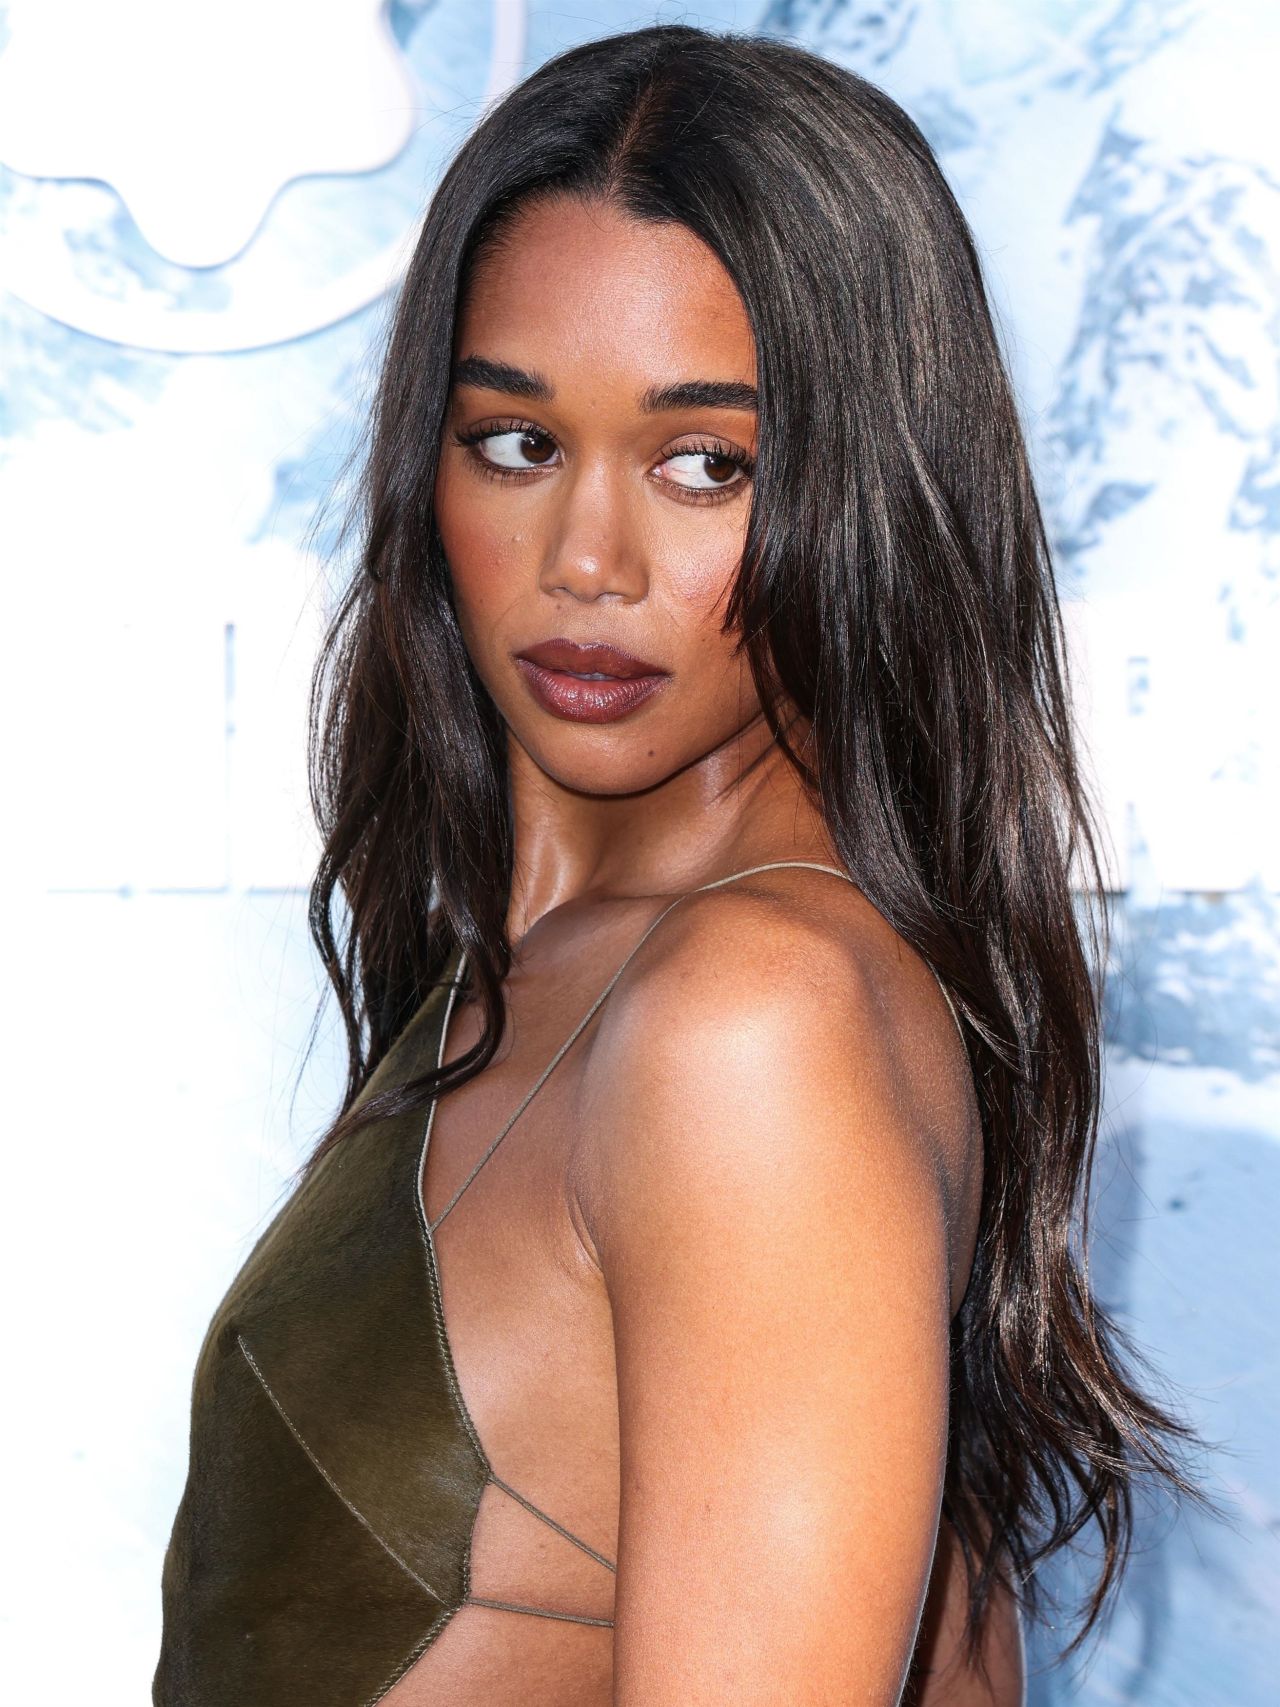 LAURA HARRIER AT MONTBLANC EVENT CELEBRATING THE 100 YEAR OF THE MEISERSTUCK PEN02